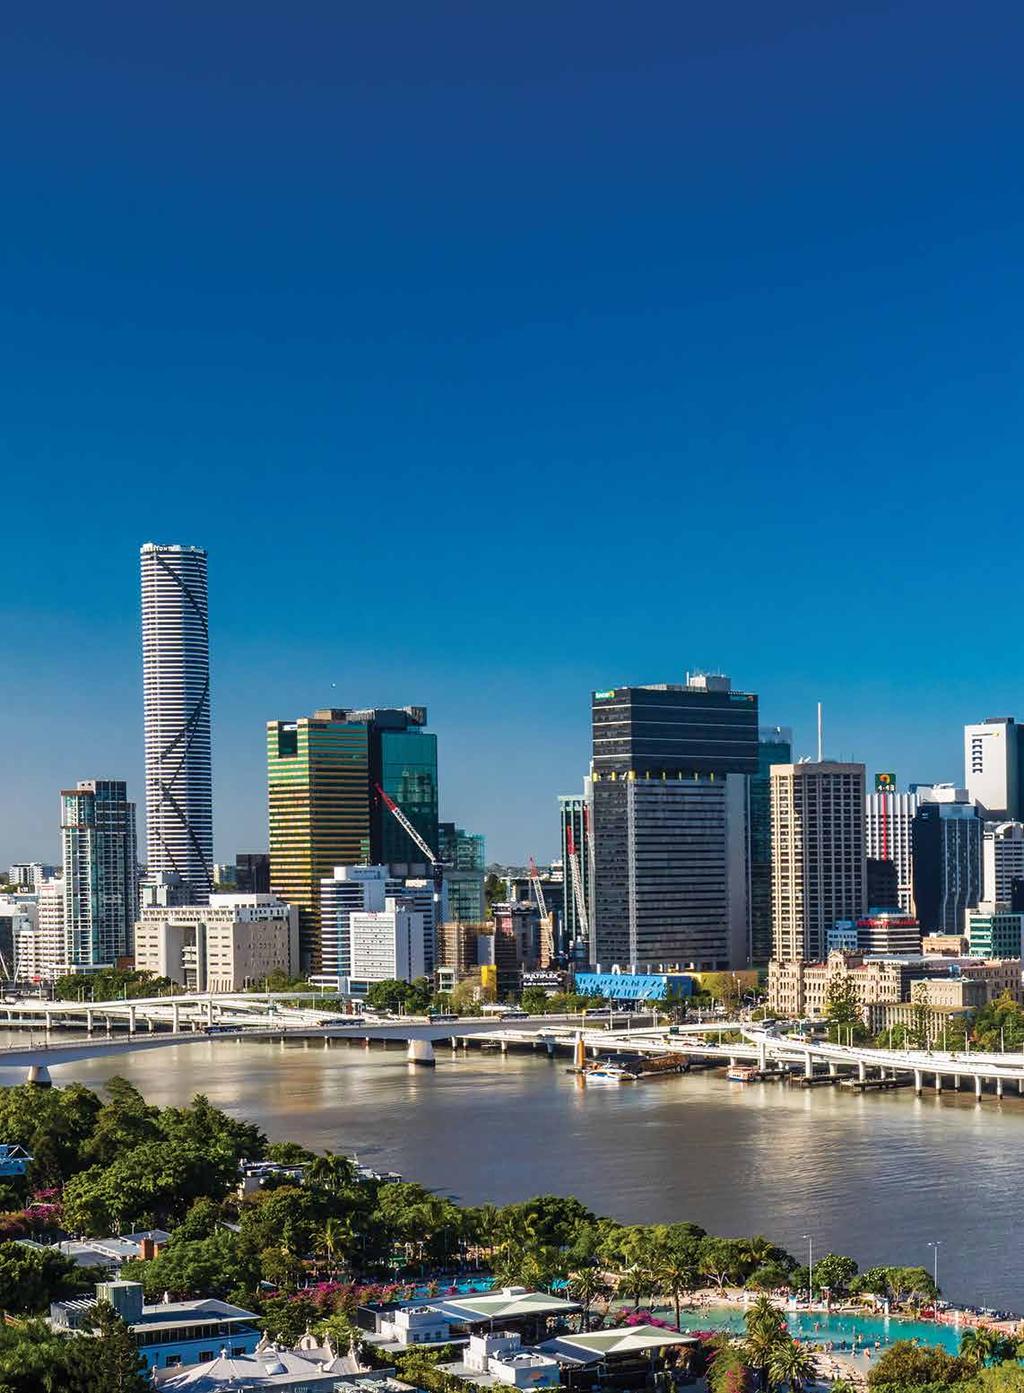 An improving global economy is good news for Queensland. Totalling $65.